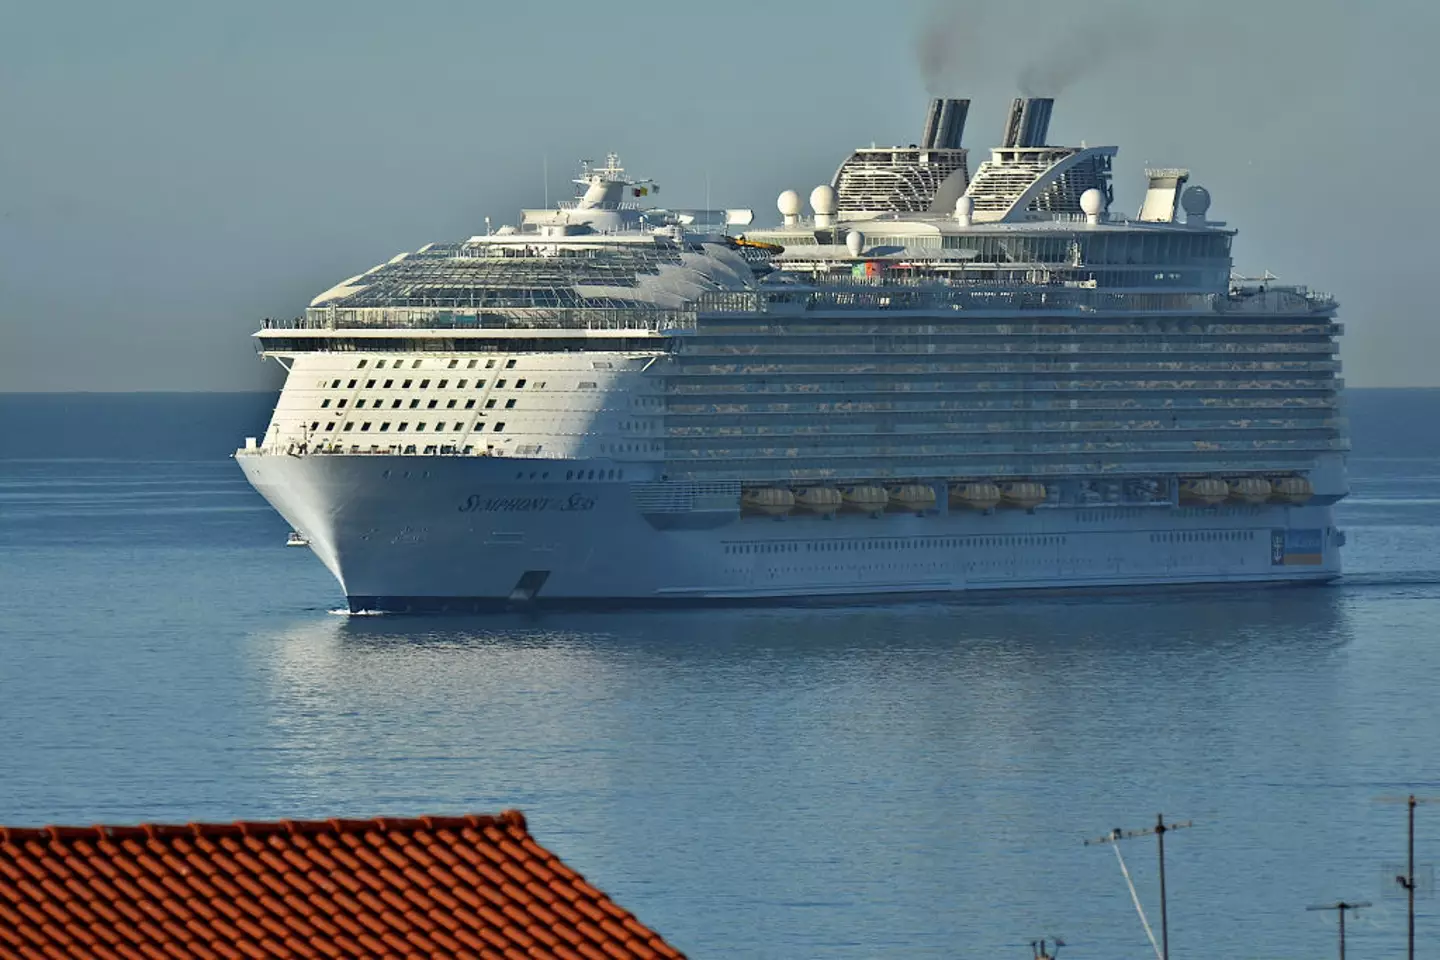 Royal Caribbean’s Voyager of the Seas.